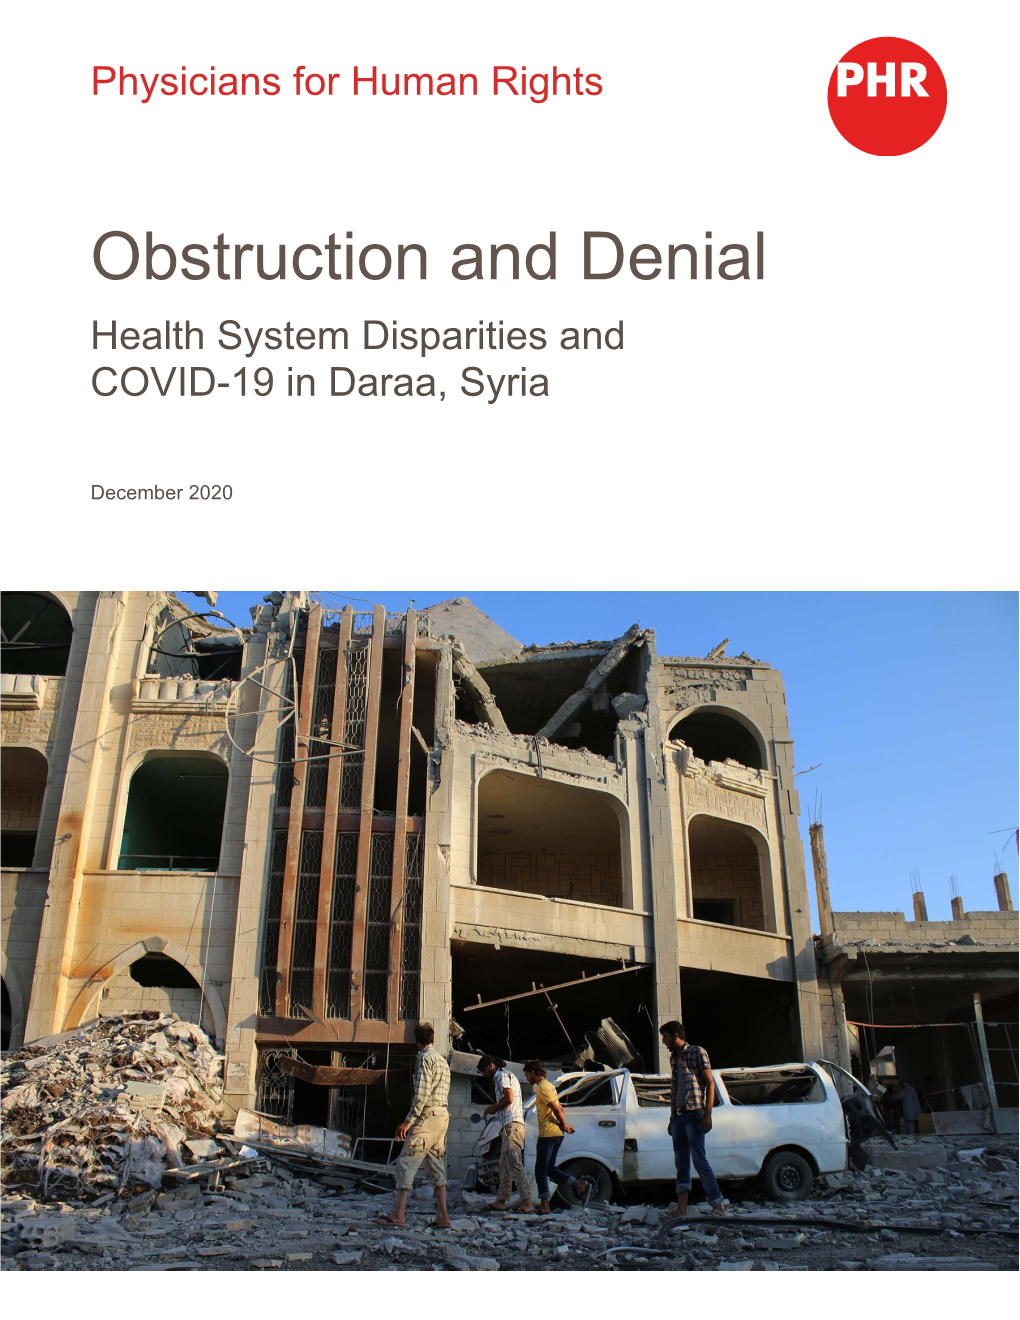 Obstruction and Denial: Health System Disparities and COVID-19